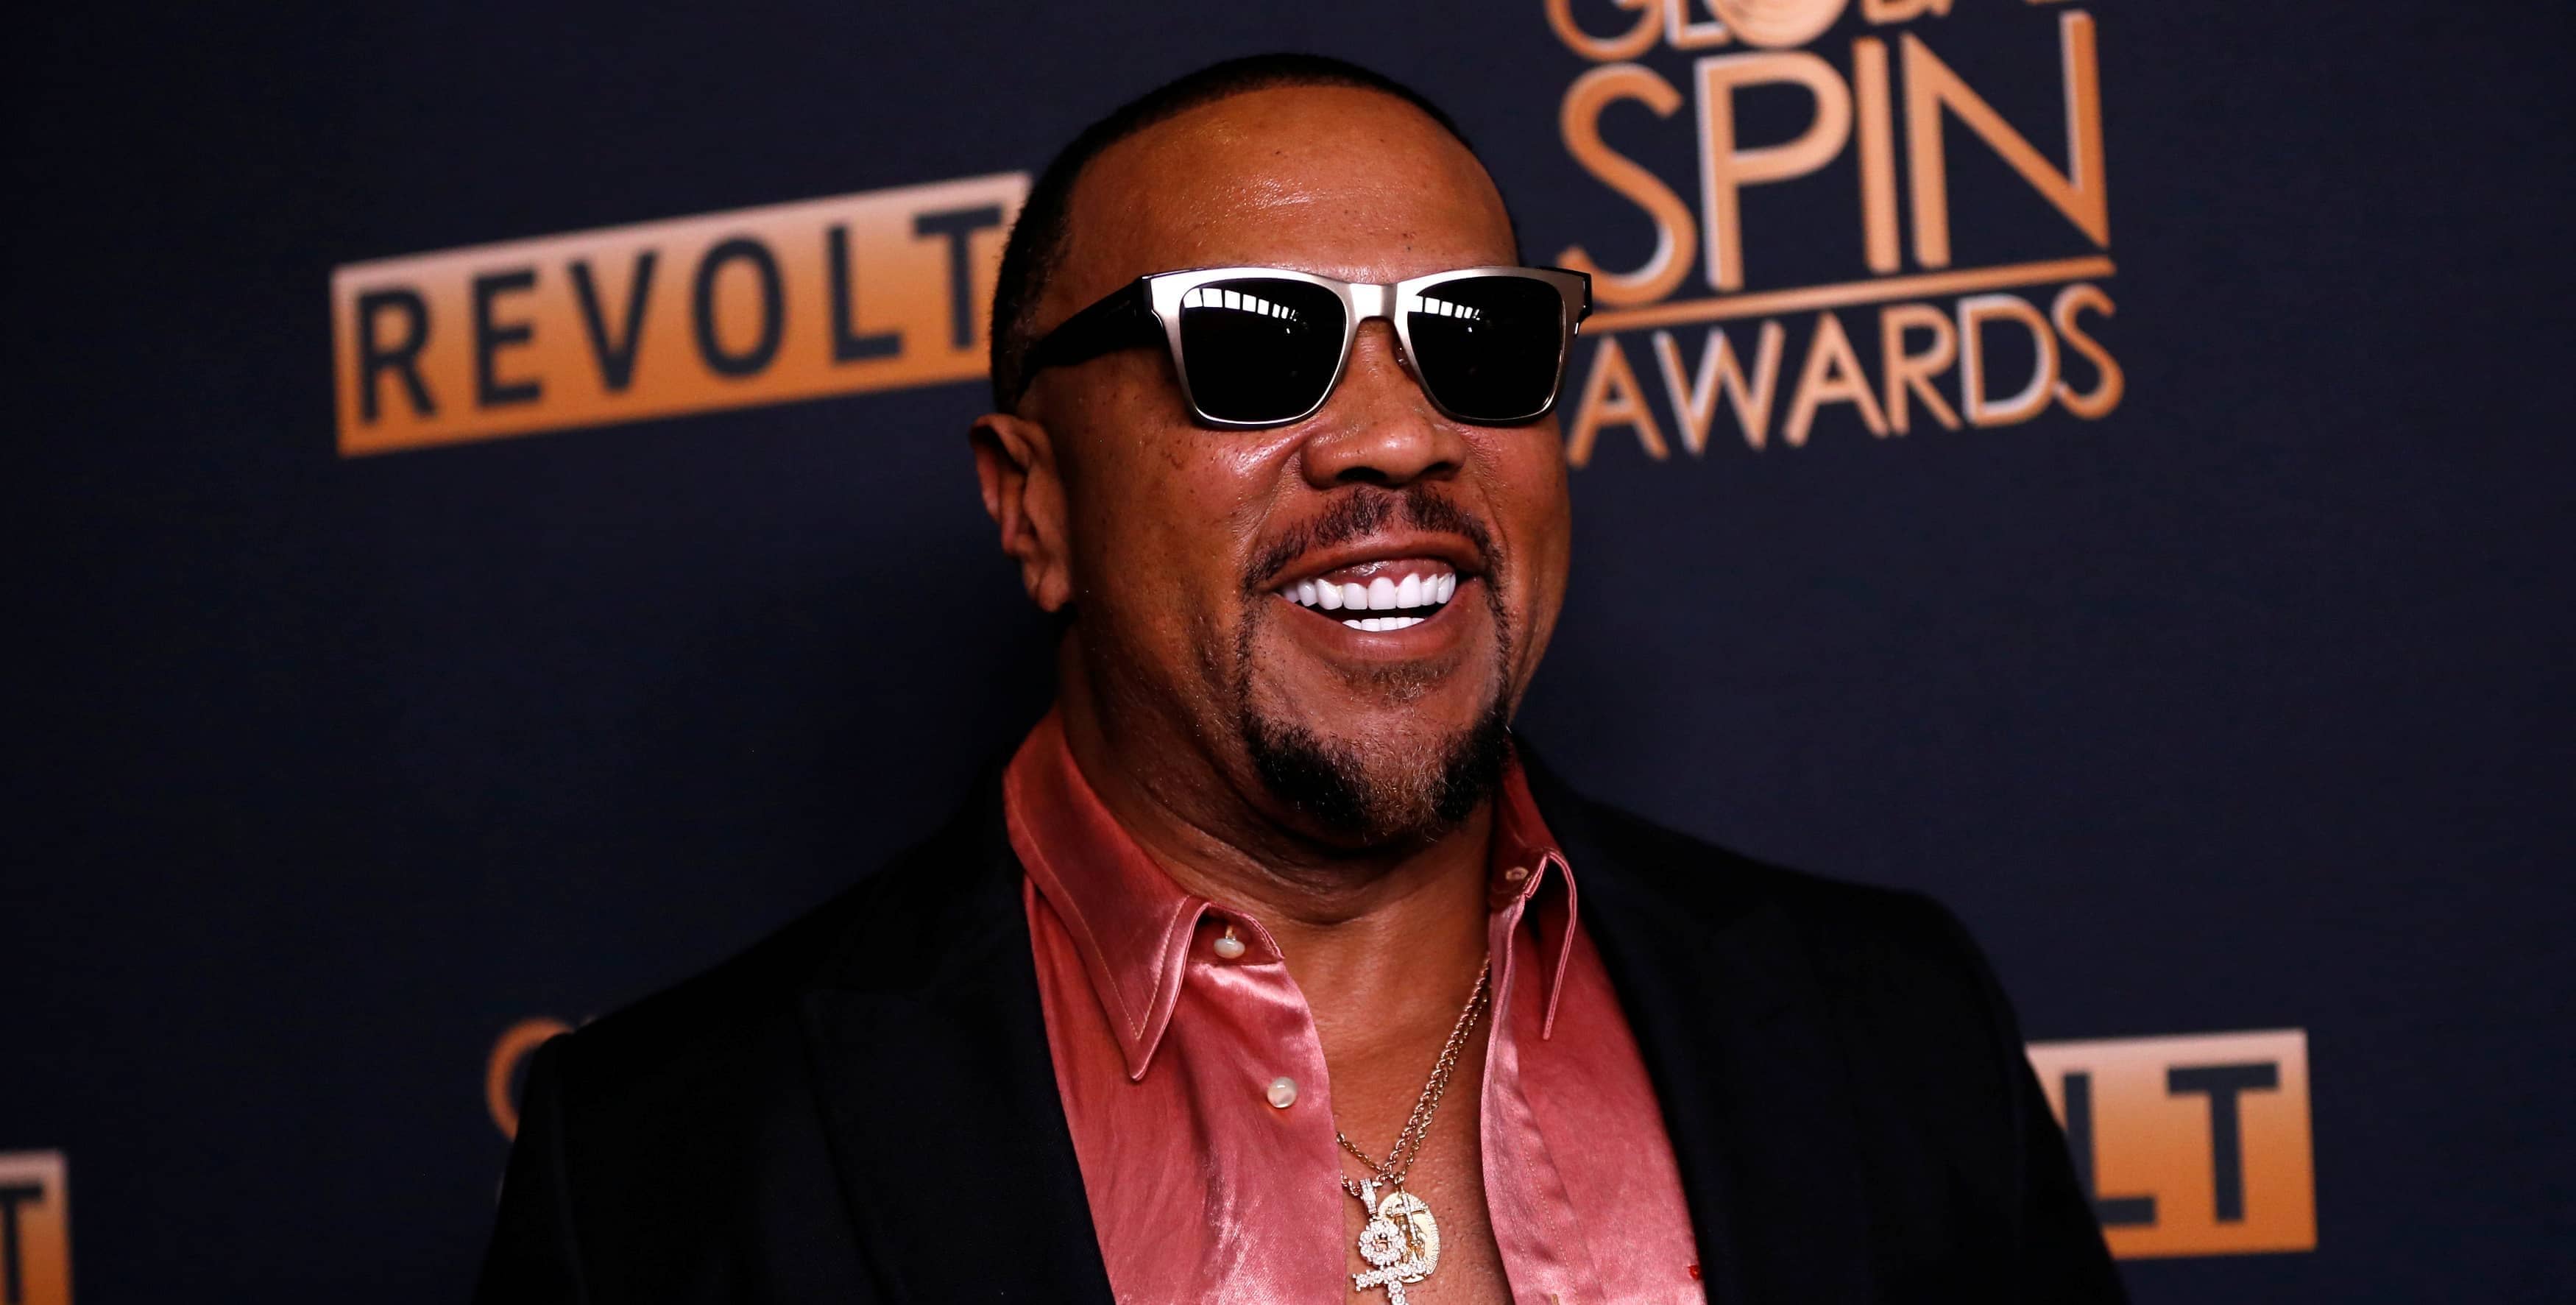 honoree-timbaland-poses-at-the-6th-annual-revolt-global-spin-awards-in-los-angeles-3